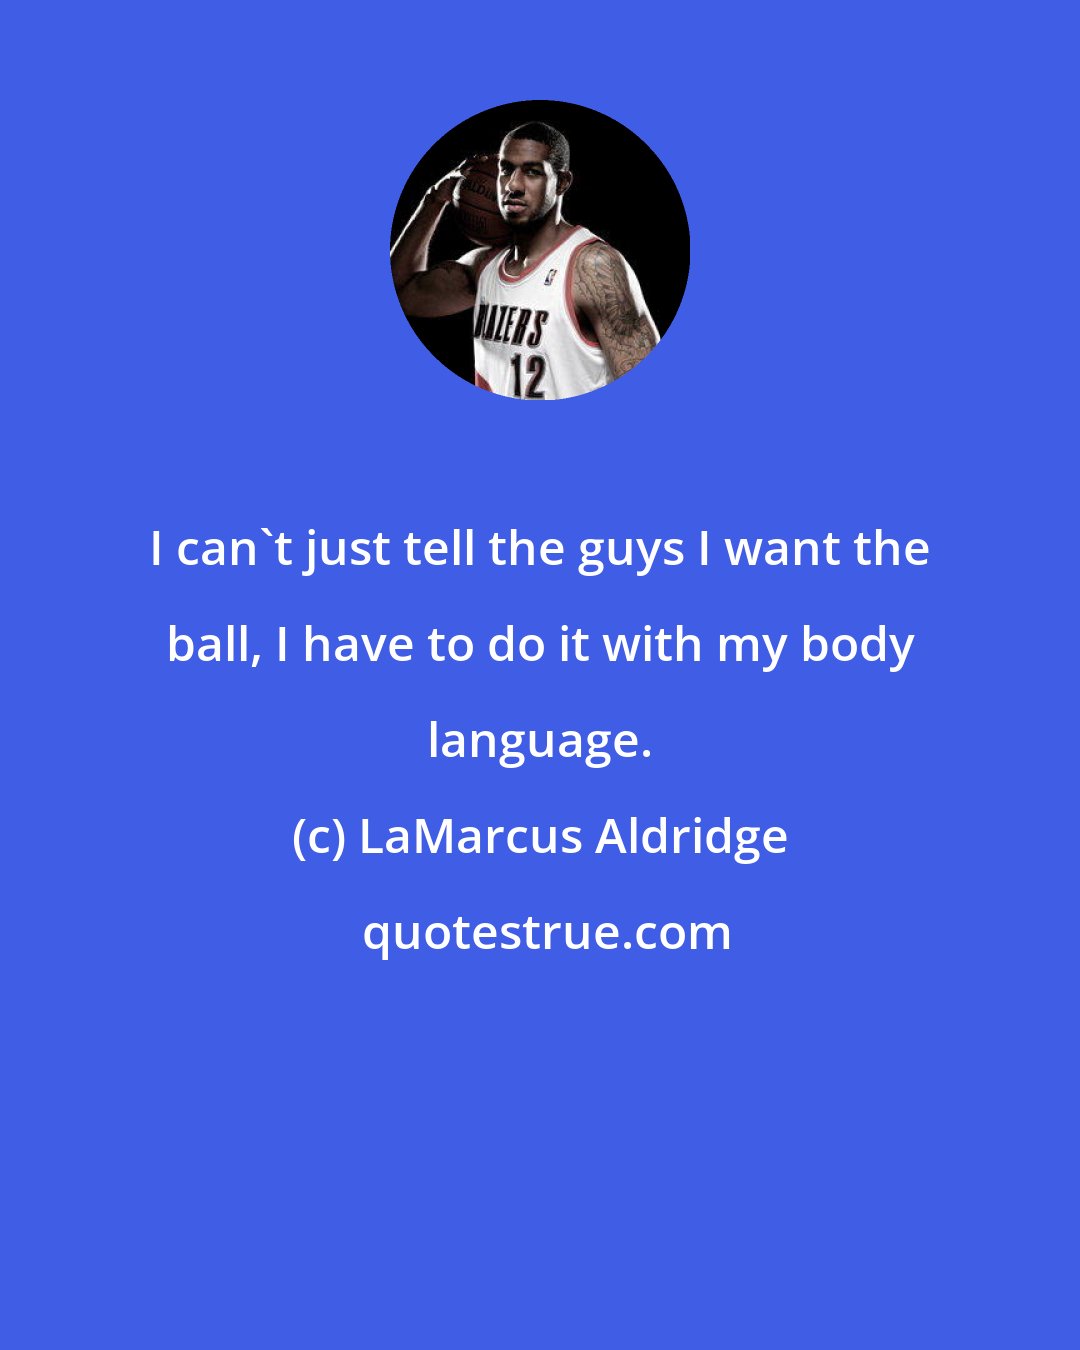 LaMarcus Aldridge: I can't just tell the guys I want the ball, I have to do it with my body language.